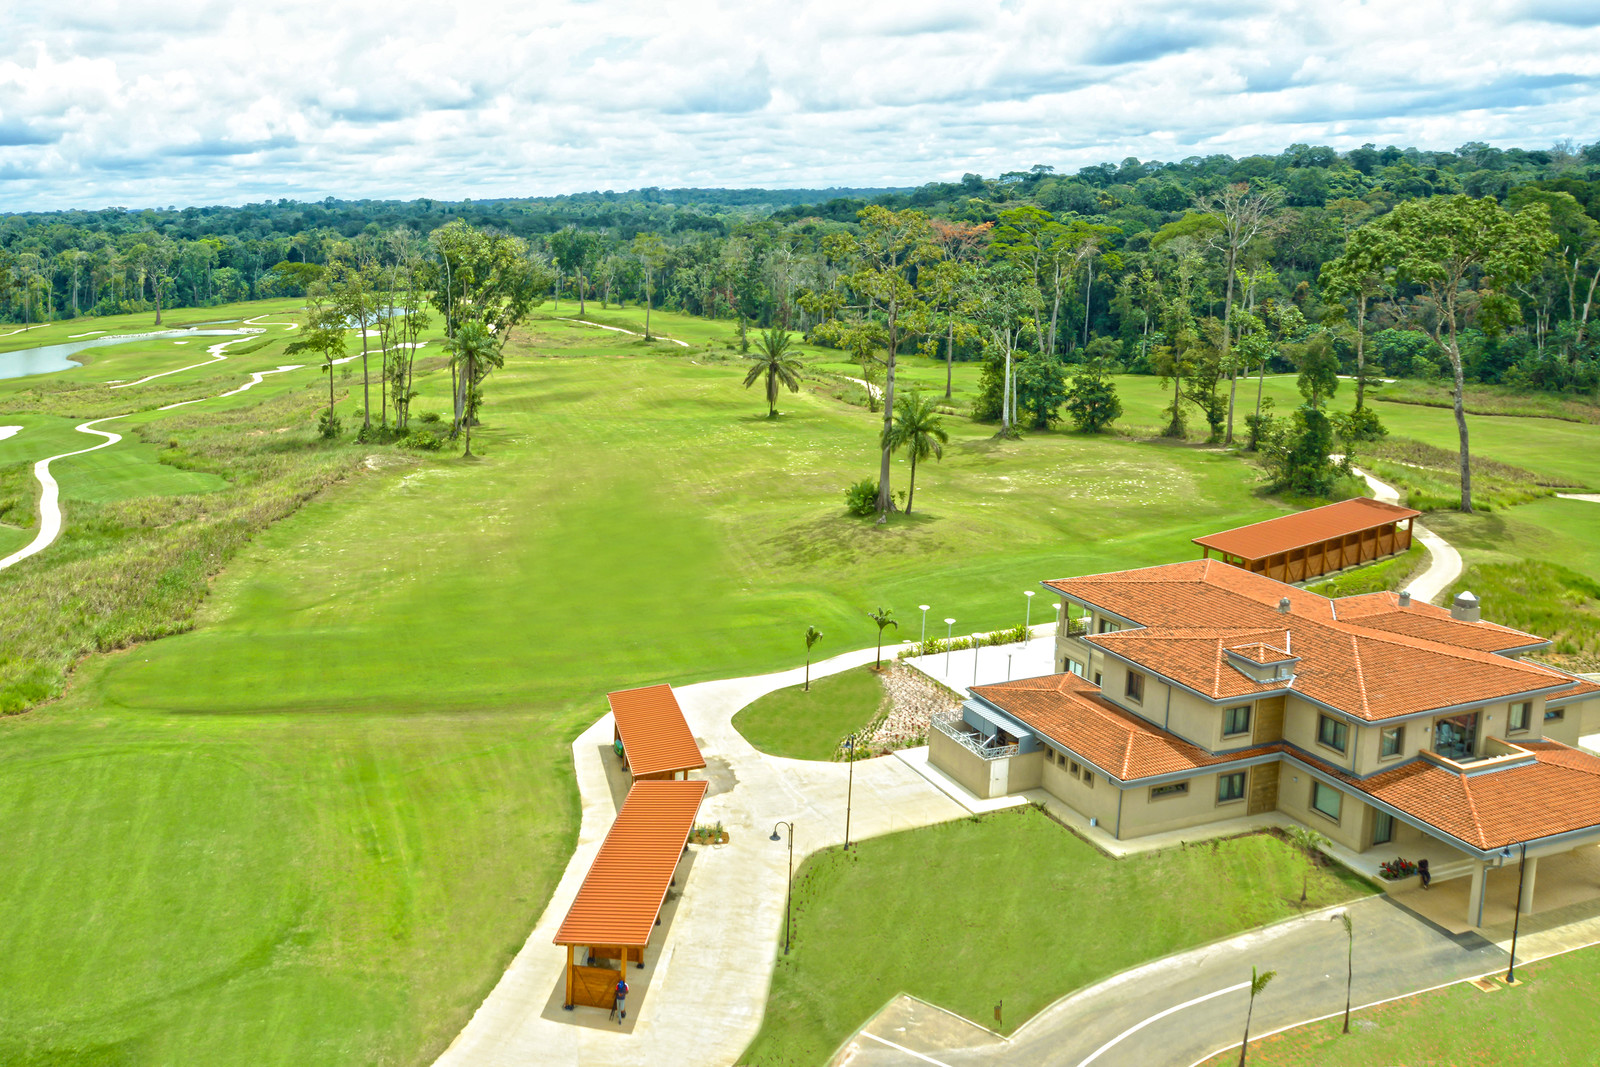 Golf Course and Club House